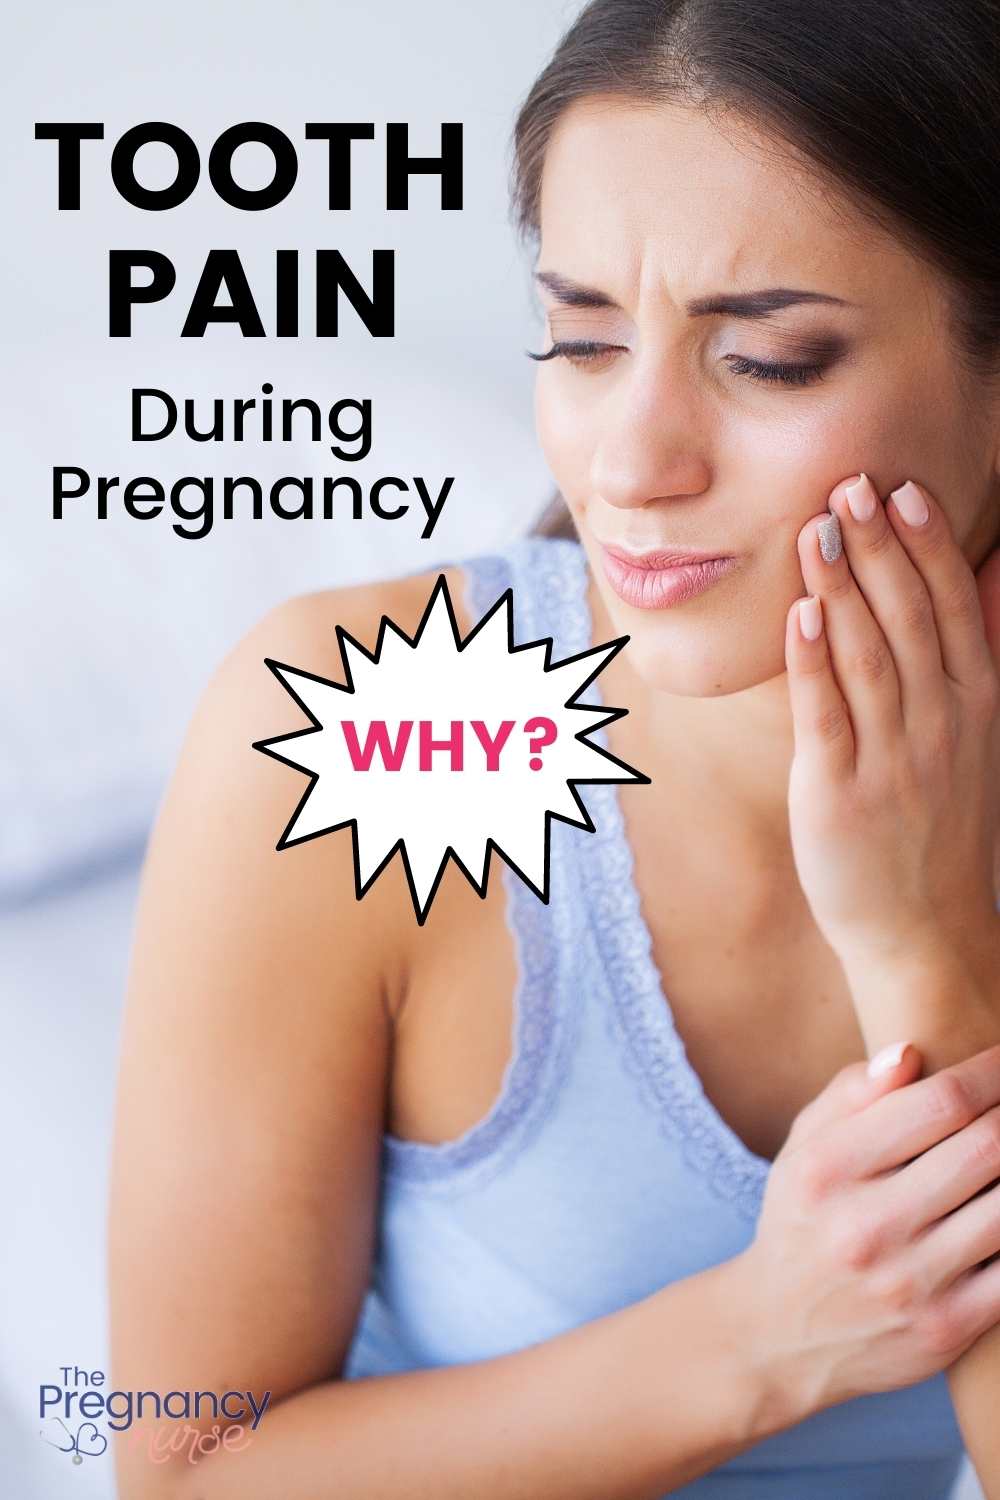 In this blog post, we'll discuss the causes of tooth pain during pregnancy and how to get relief. We'll also cover some tips for keeping your teeth healthy during pregnancy. Read on to learn more!